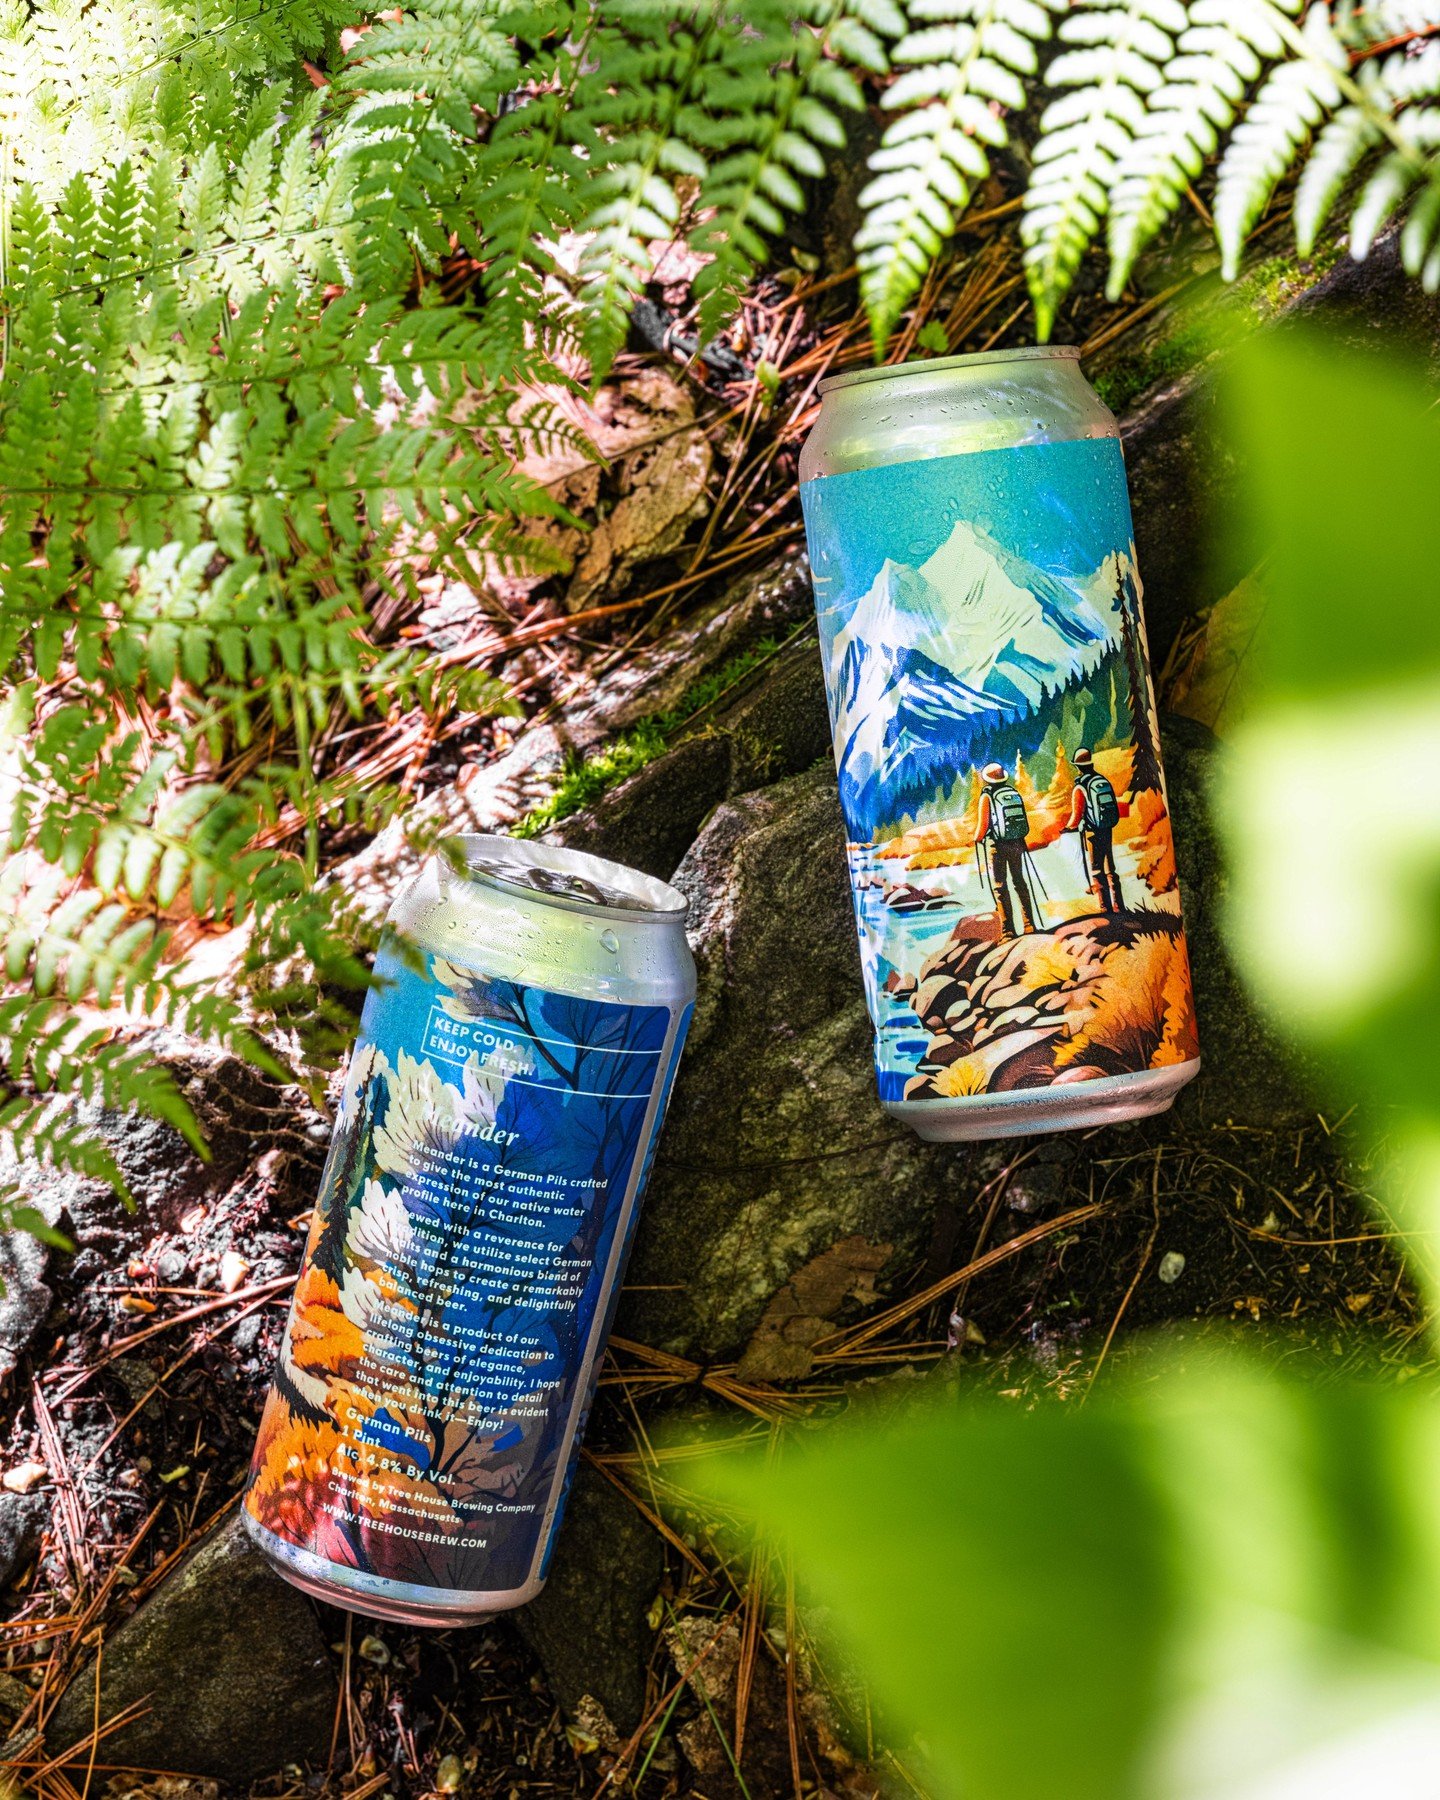 Meander is a German Pils crafted to give the most authentic expression of our native water profile here in Charlton.

Brewed with a reverence for tradition, we utilize select German malts and a harmonious blend of noble hops to create a remarkably cr